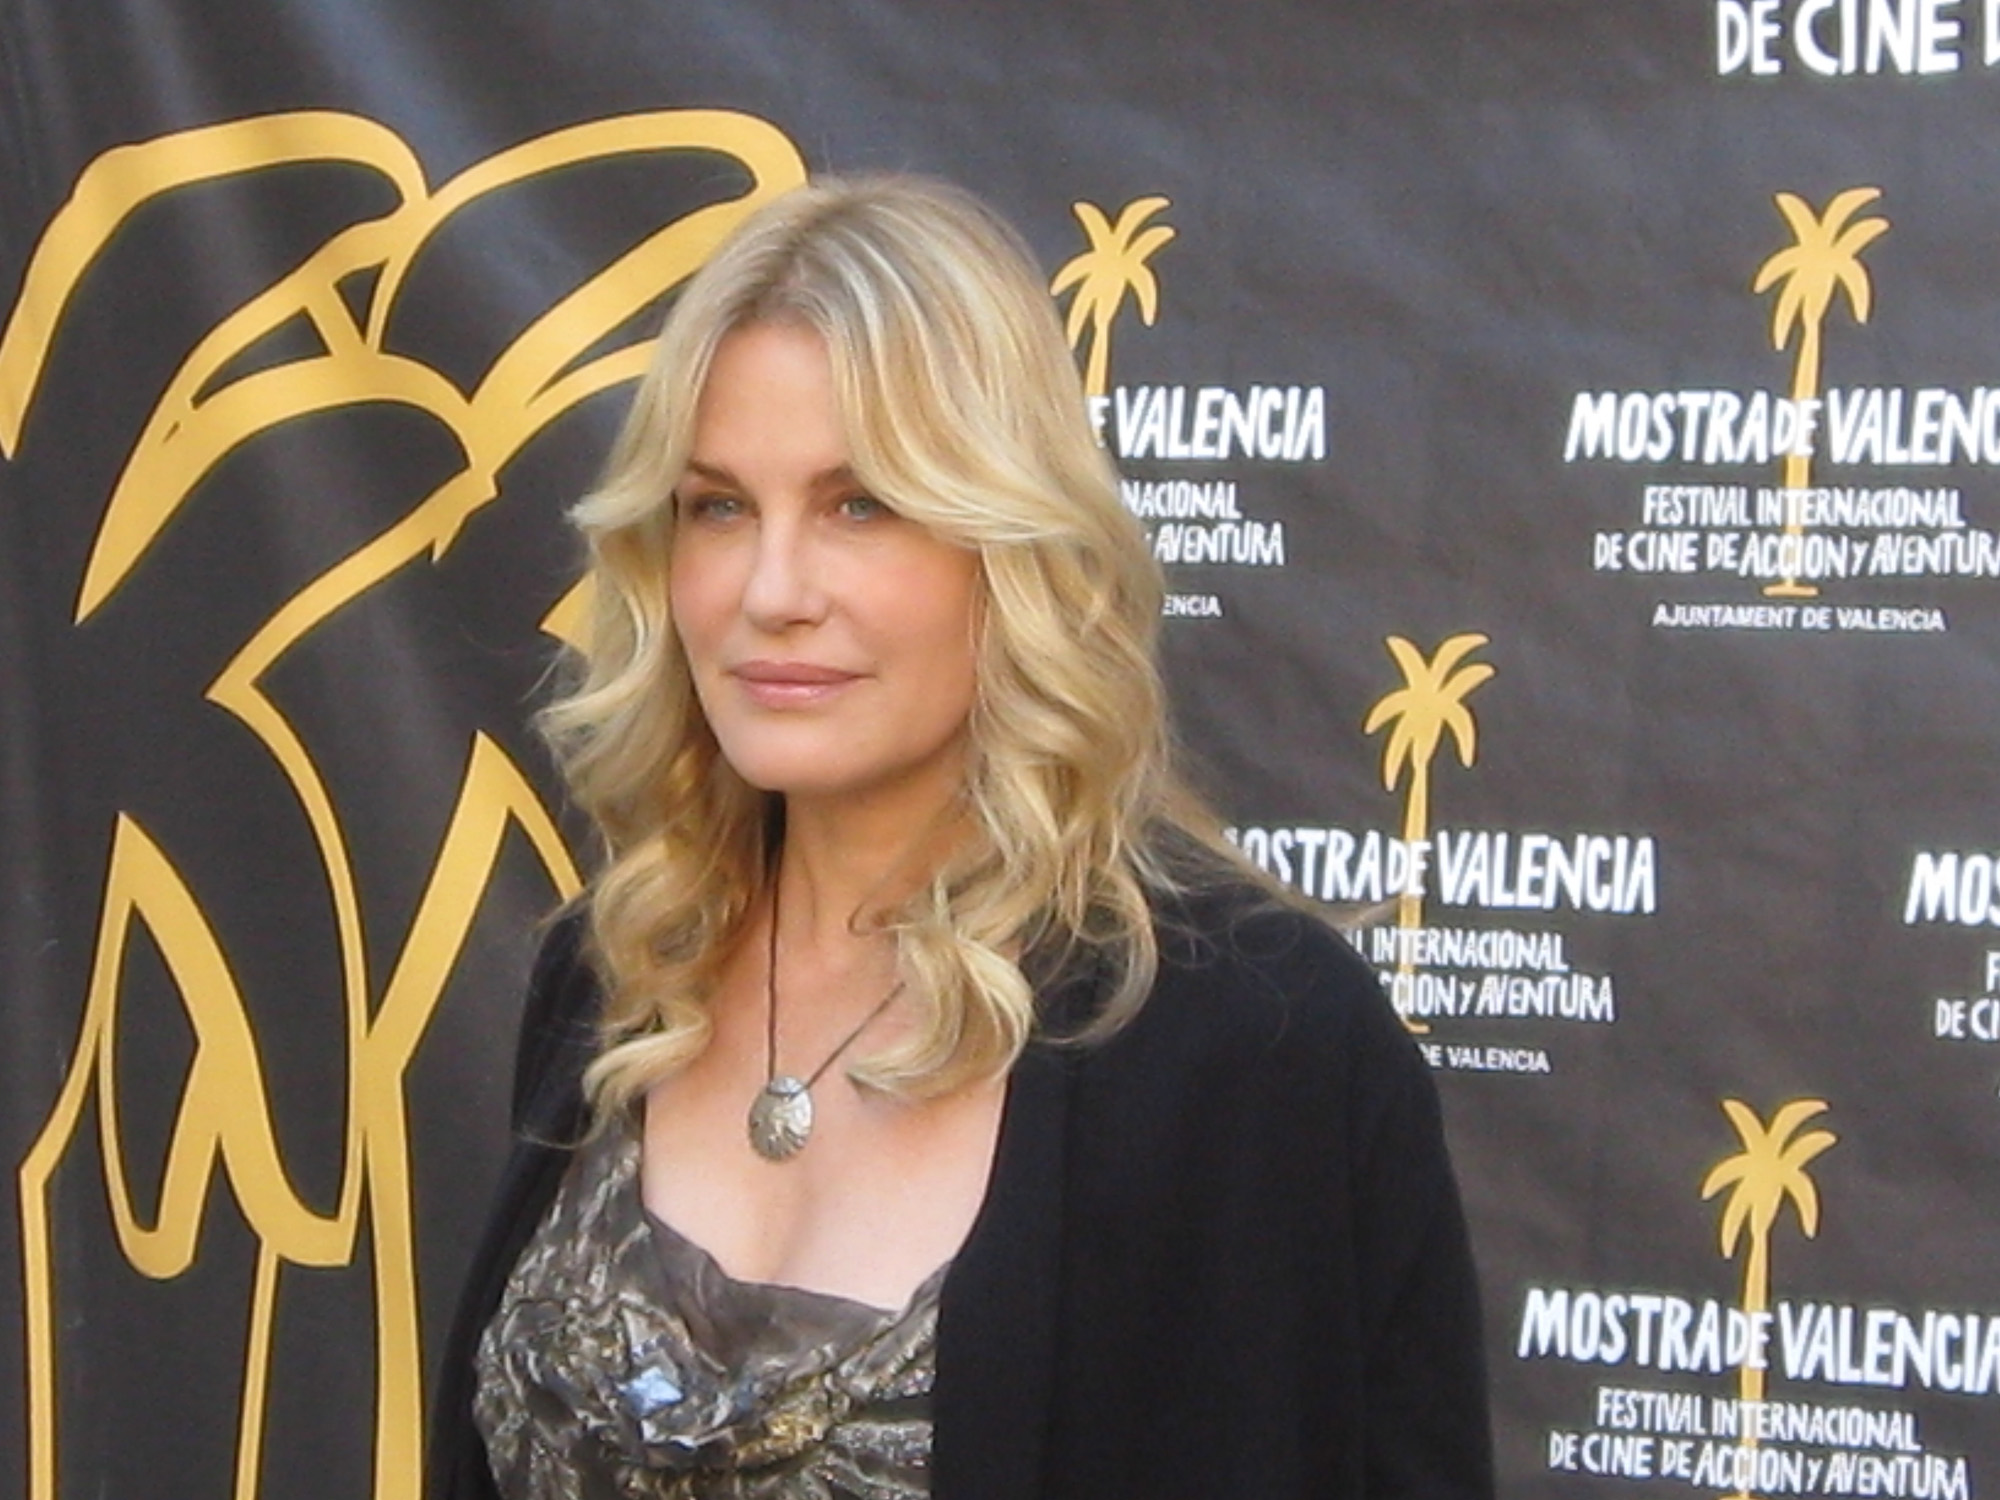 The actress Daryl Hannah is standing in front of a backdrop that promotes the event she is attending.